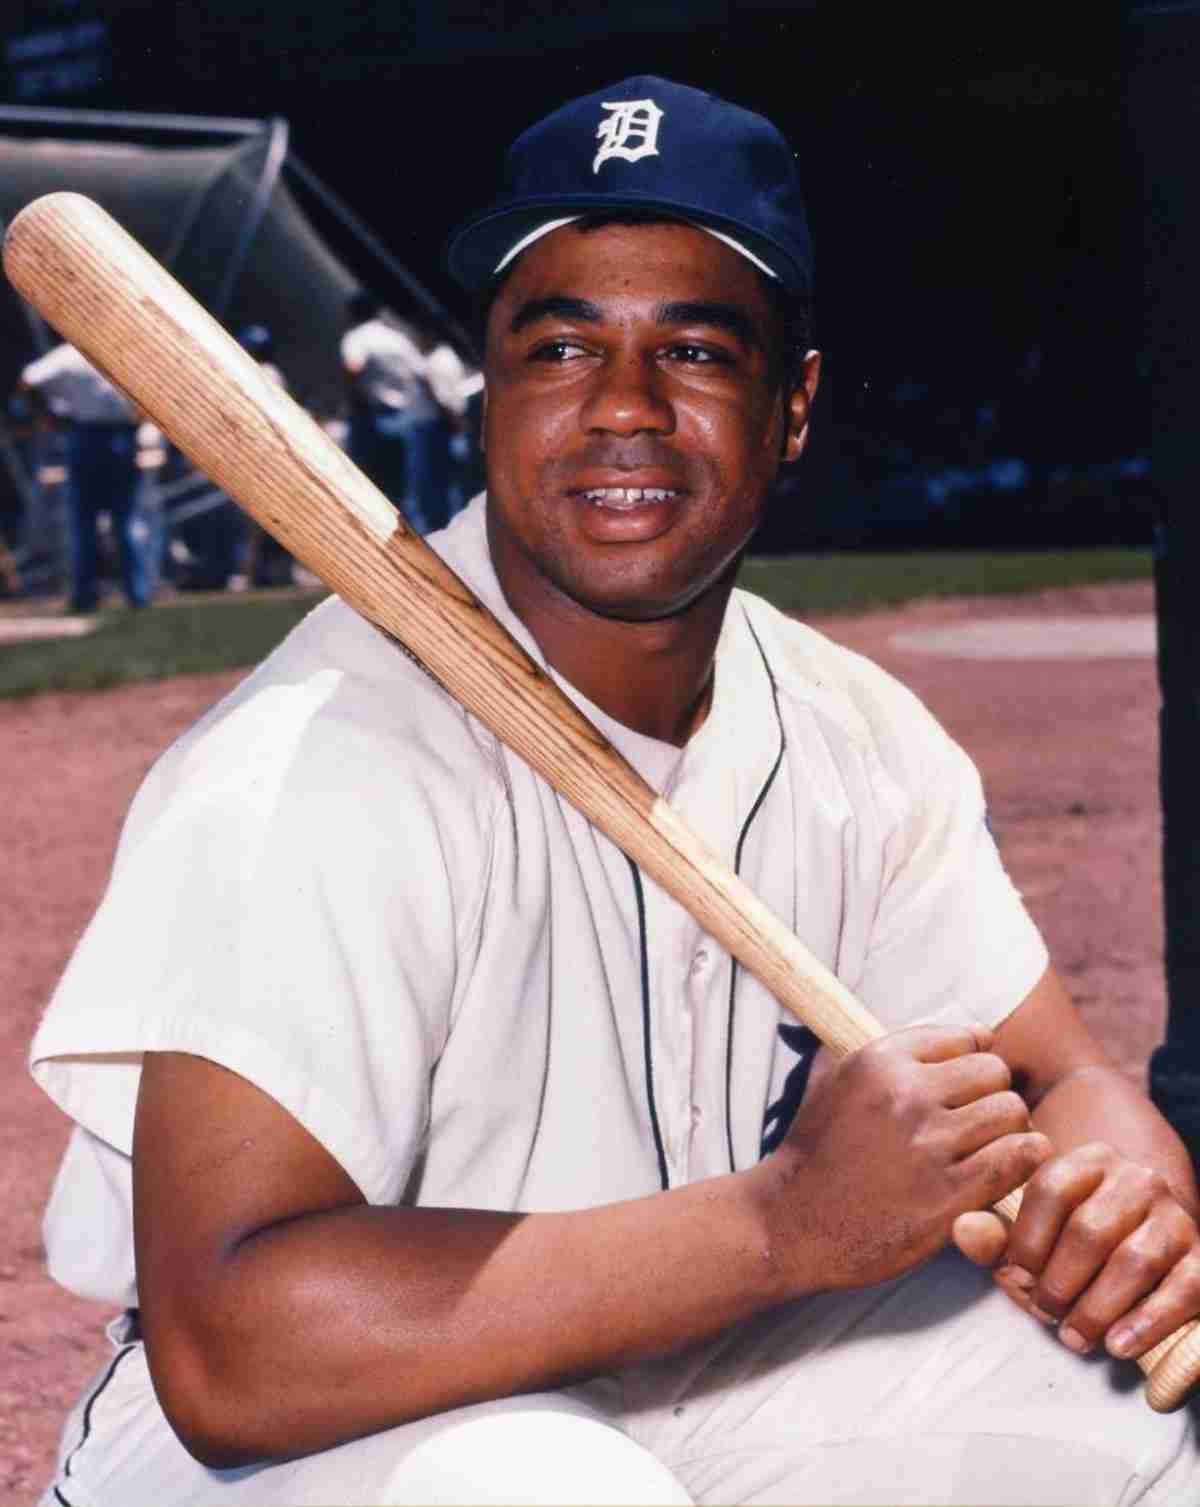 Not in Hall of Fame - 34. Willie Horton